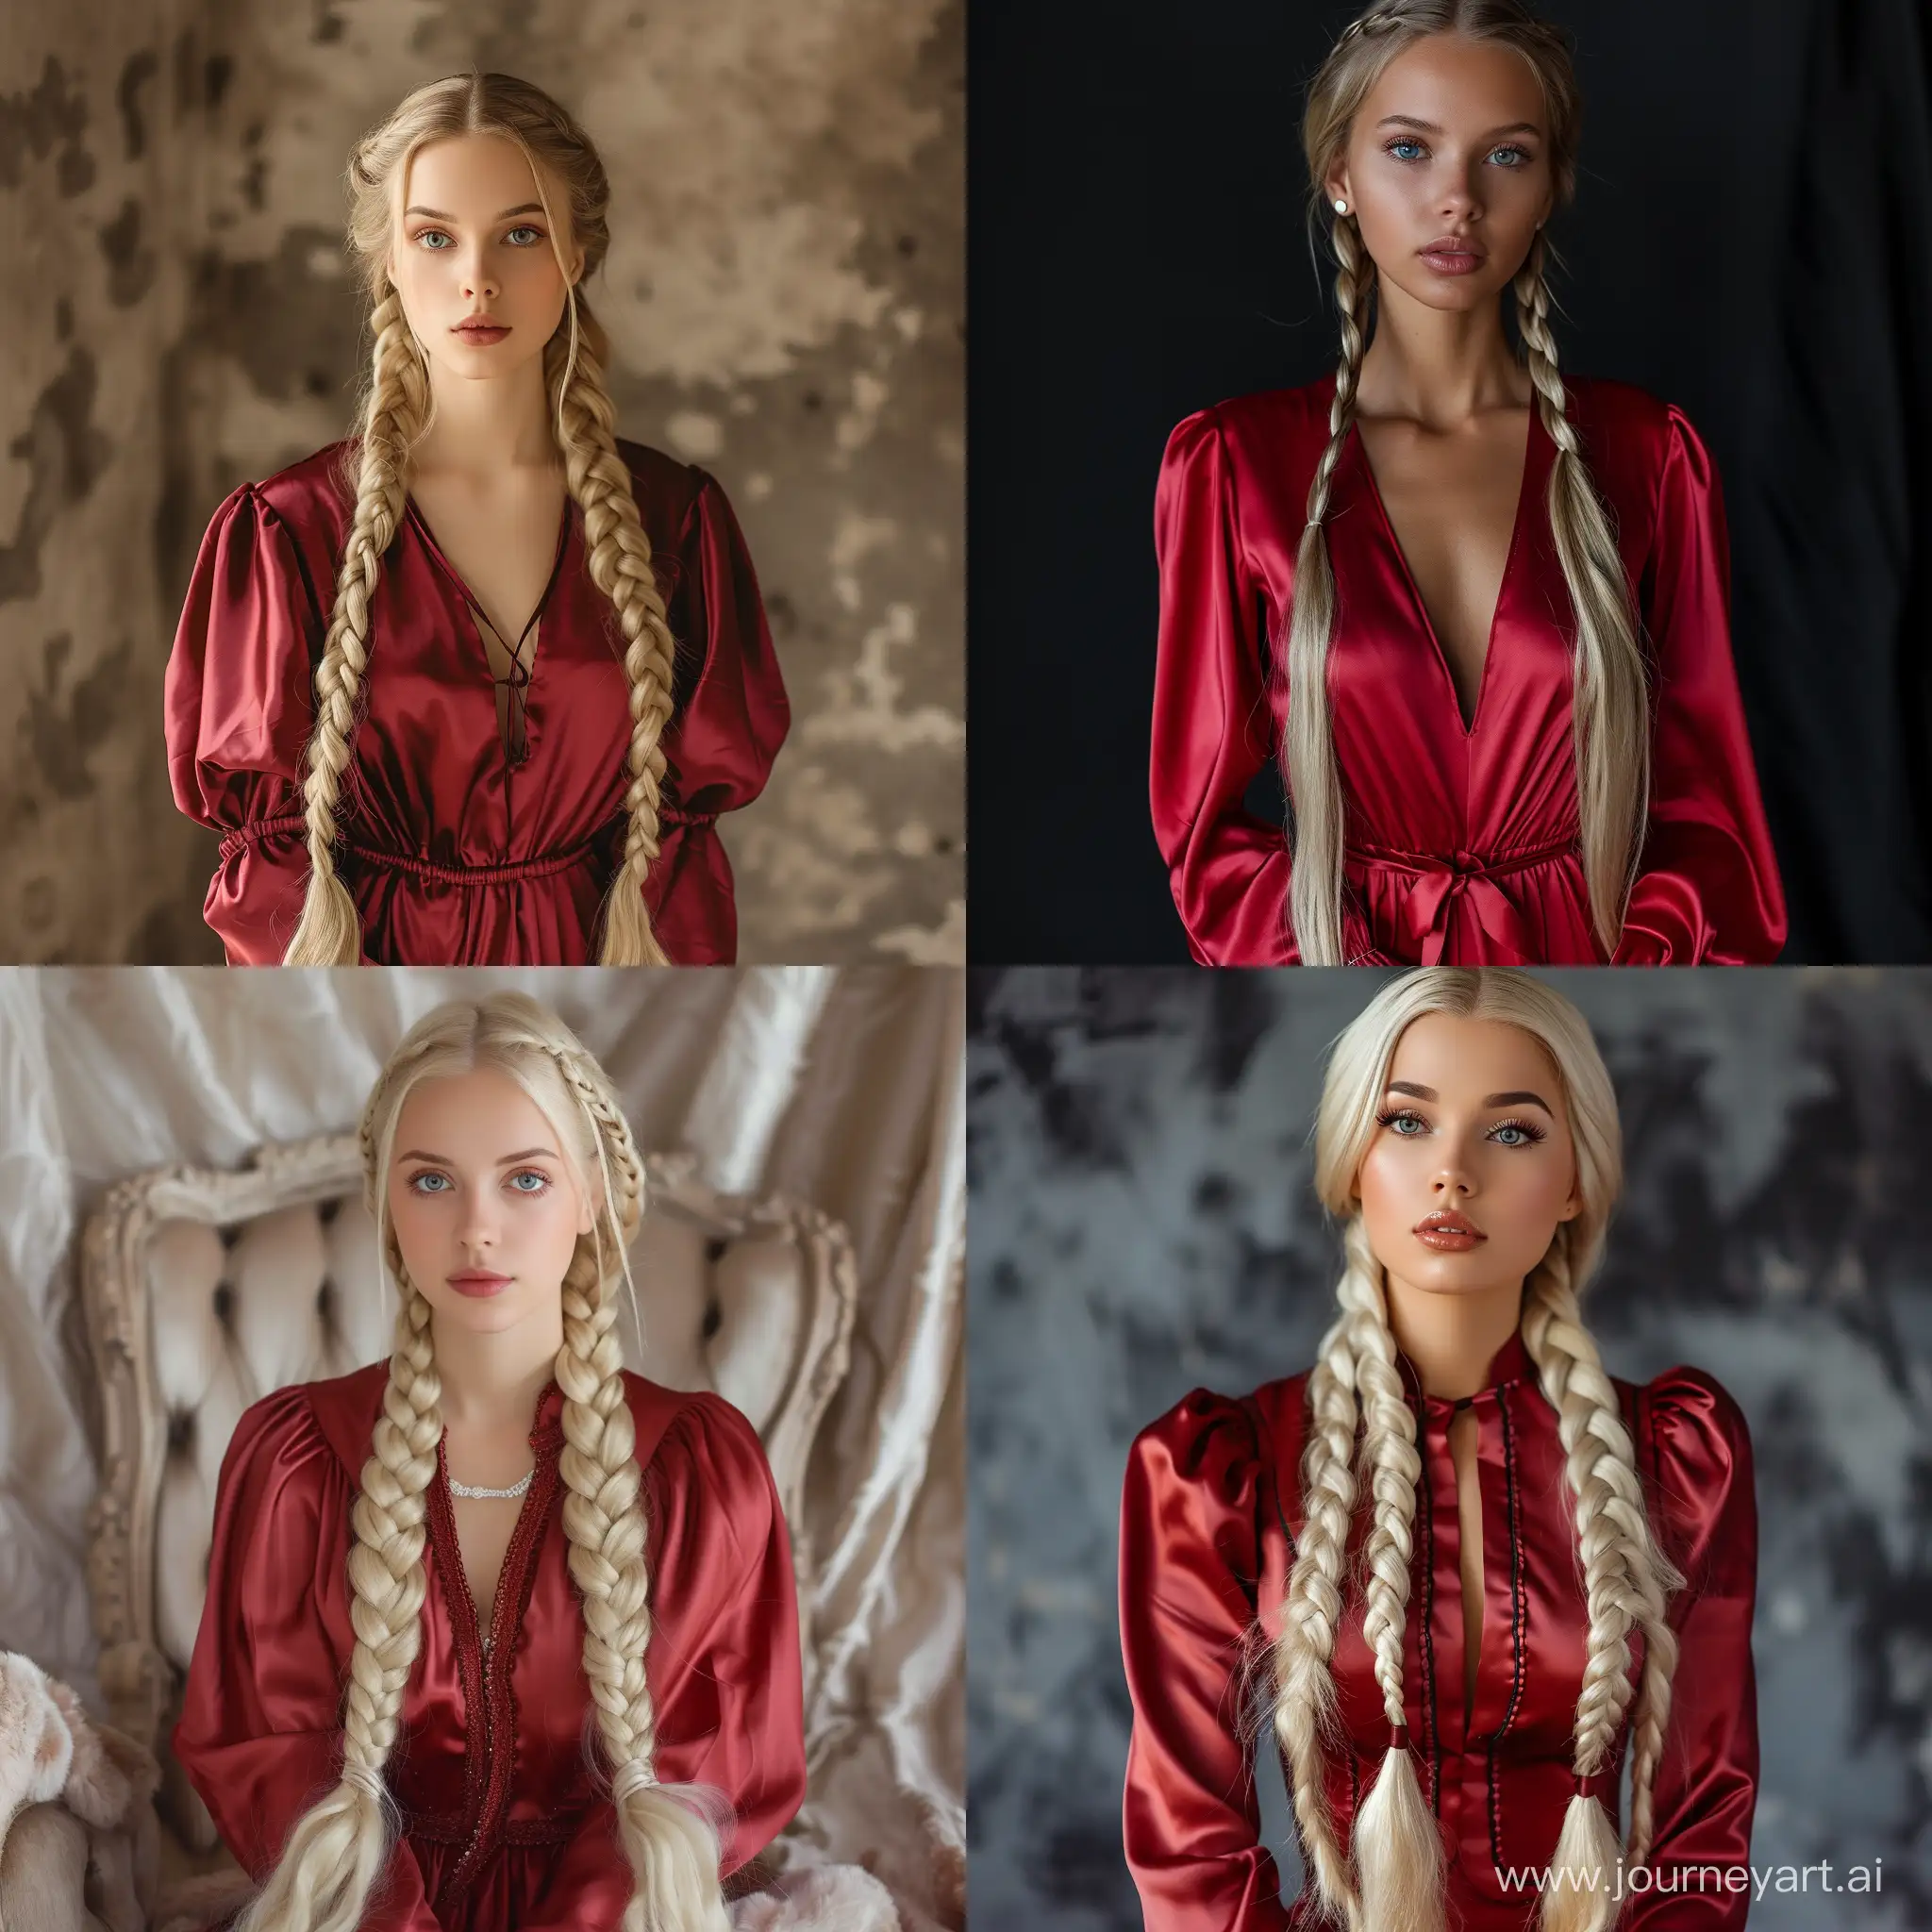 Elegant-Young-Woman-in-Red-Silk-Dress-with-Braided-Hair